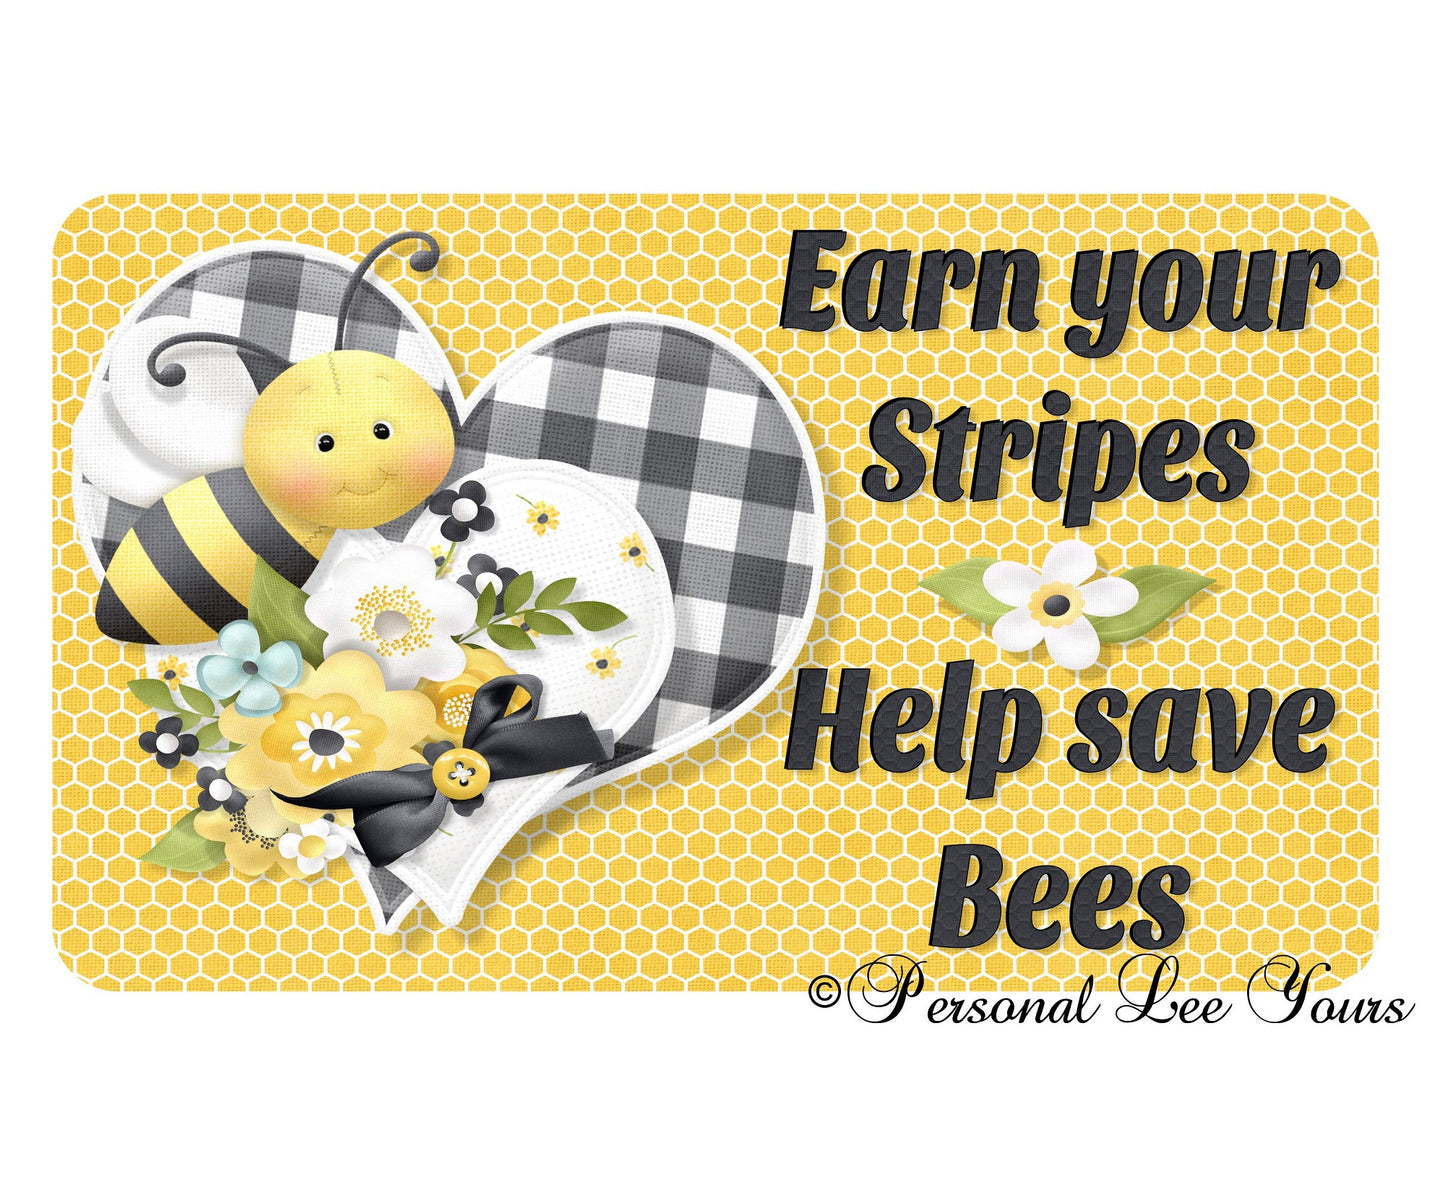 Metal Wreath Sign * Bee * Earn Your Stripes - Help Save Bees * 3 Sizes * Lightweight